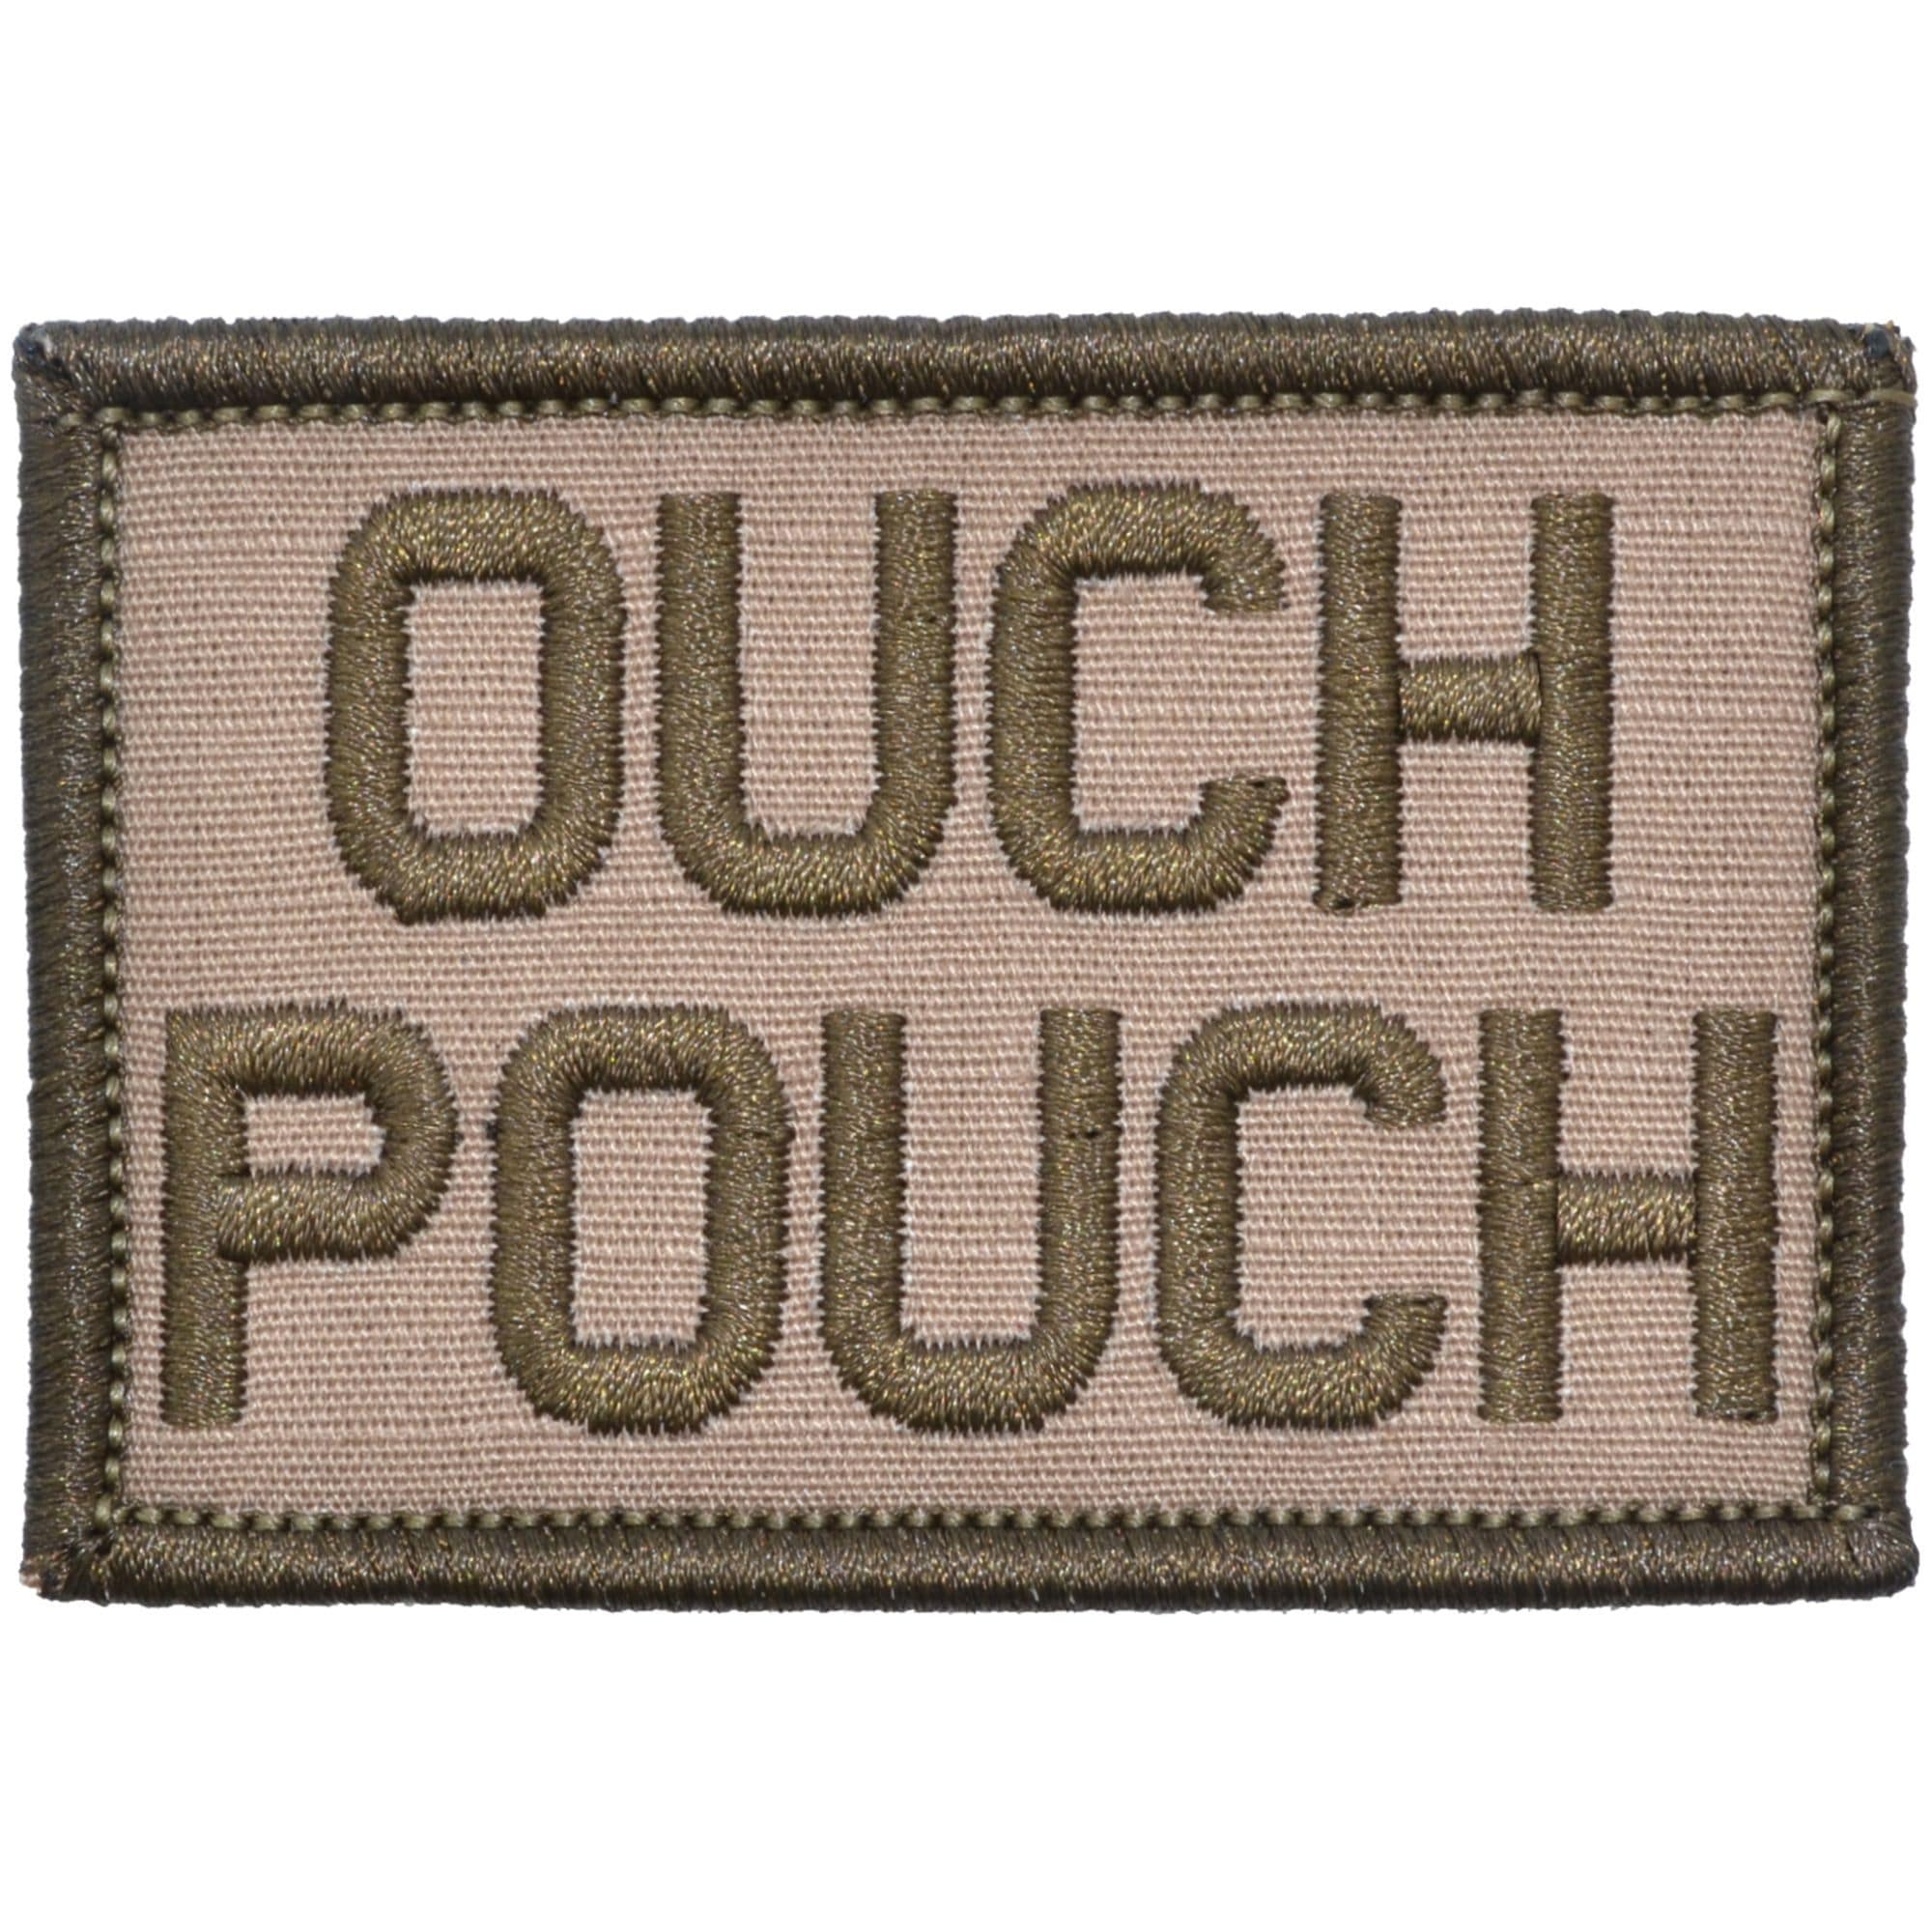 Embroidered Tactical Applique Fastener Hook Loop Emblem Ouch Pouch Patch  for First Aid Trauma Kit Bag